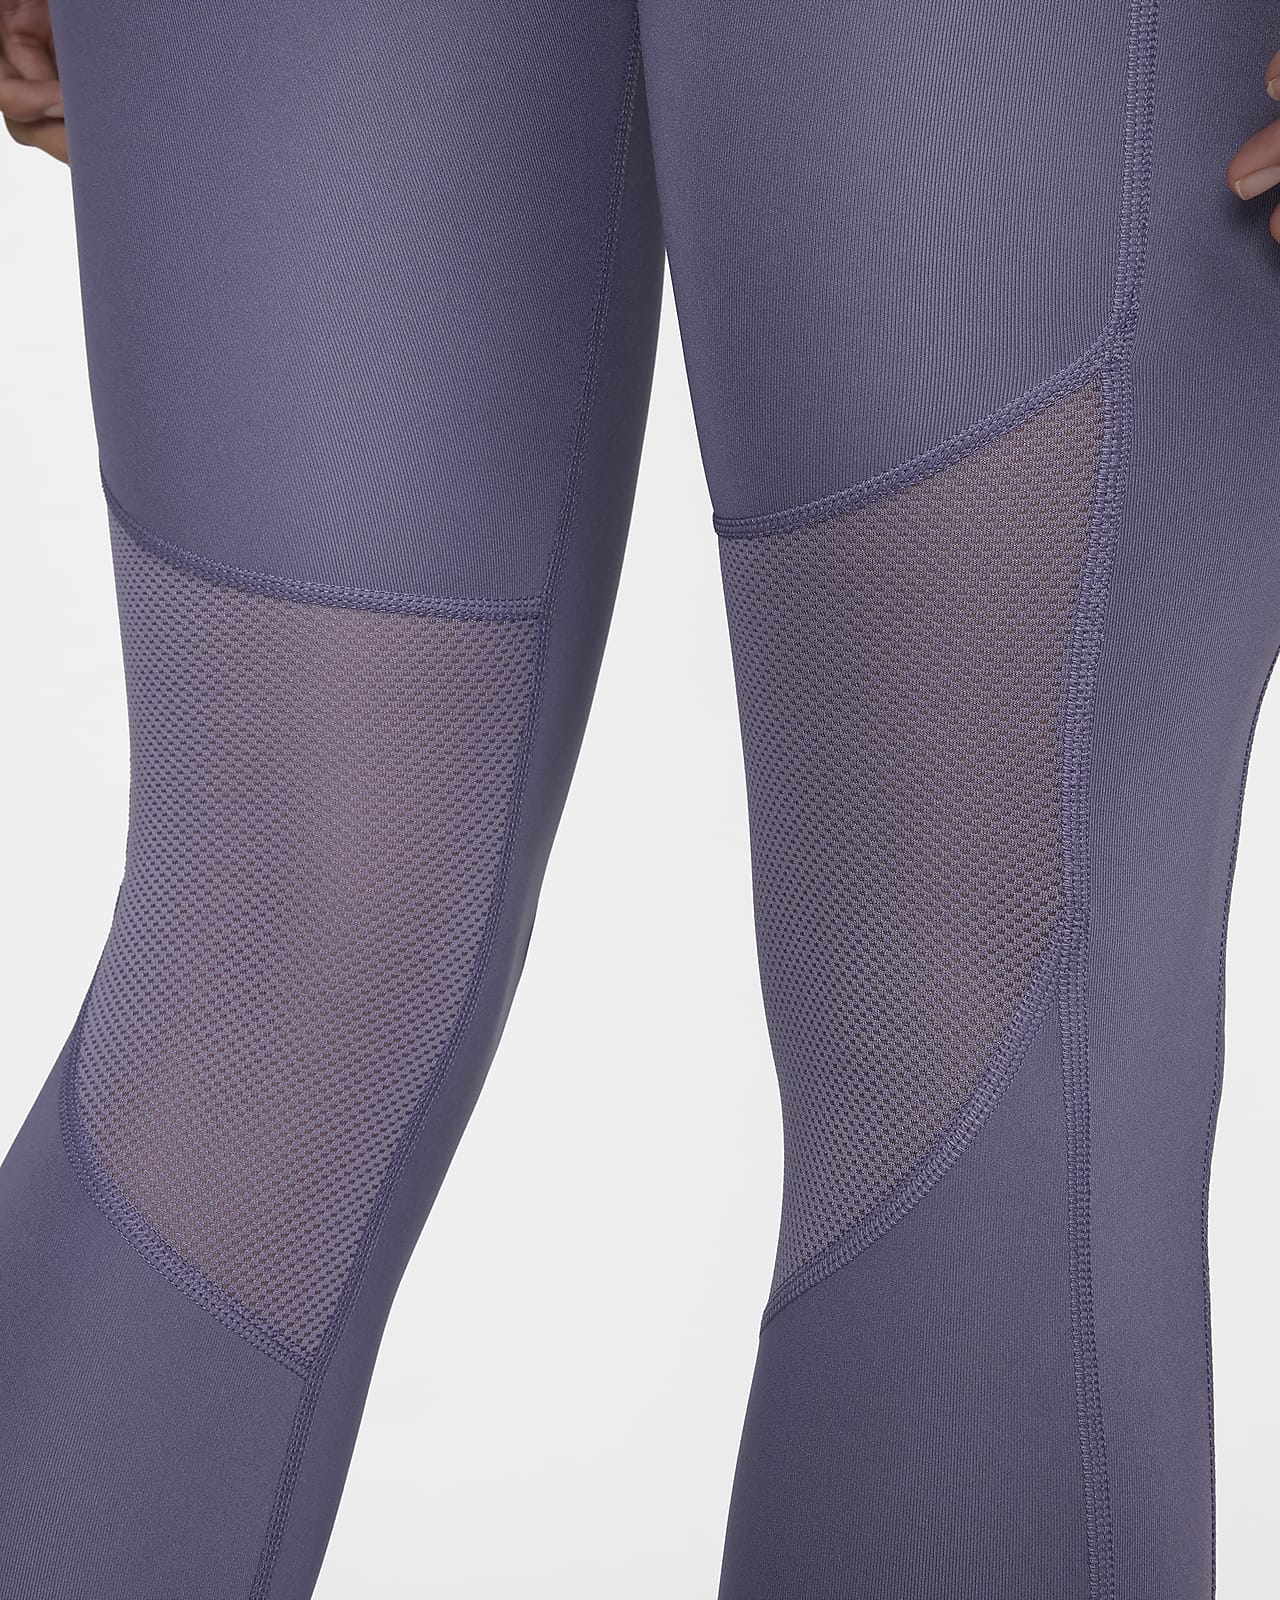 Nike Epic Fast Mid-Rise Running Tights, Tights